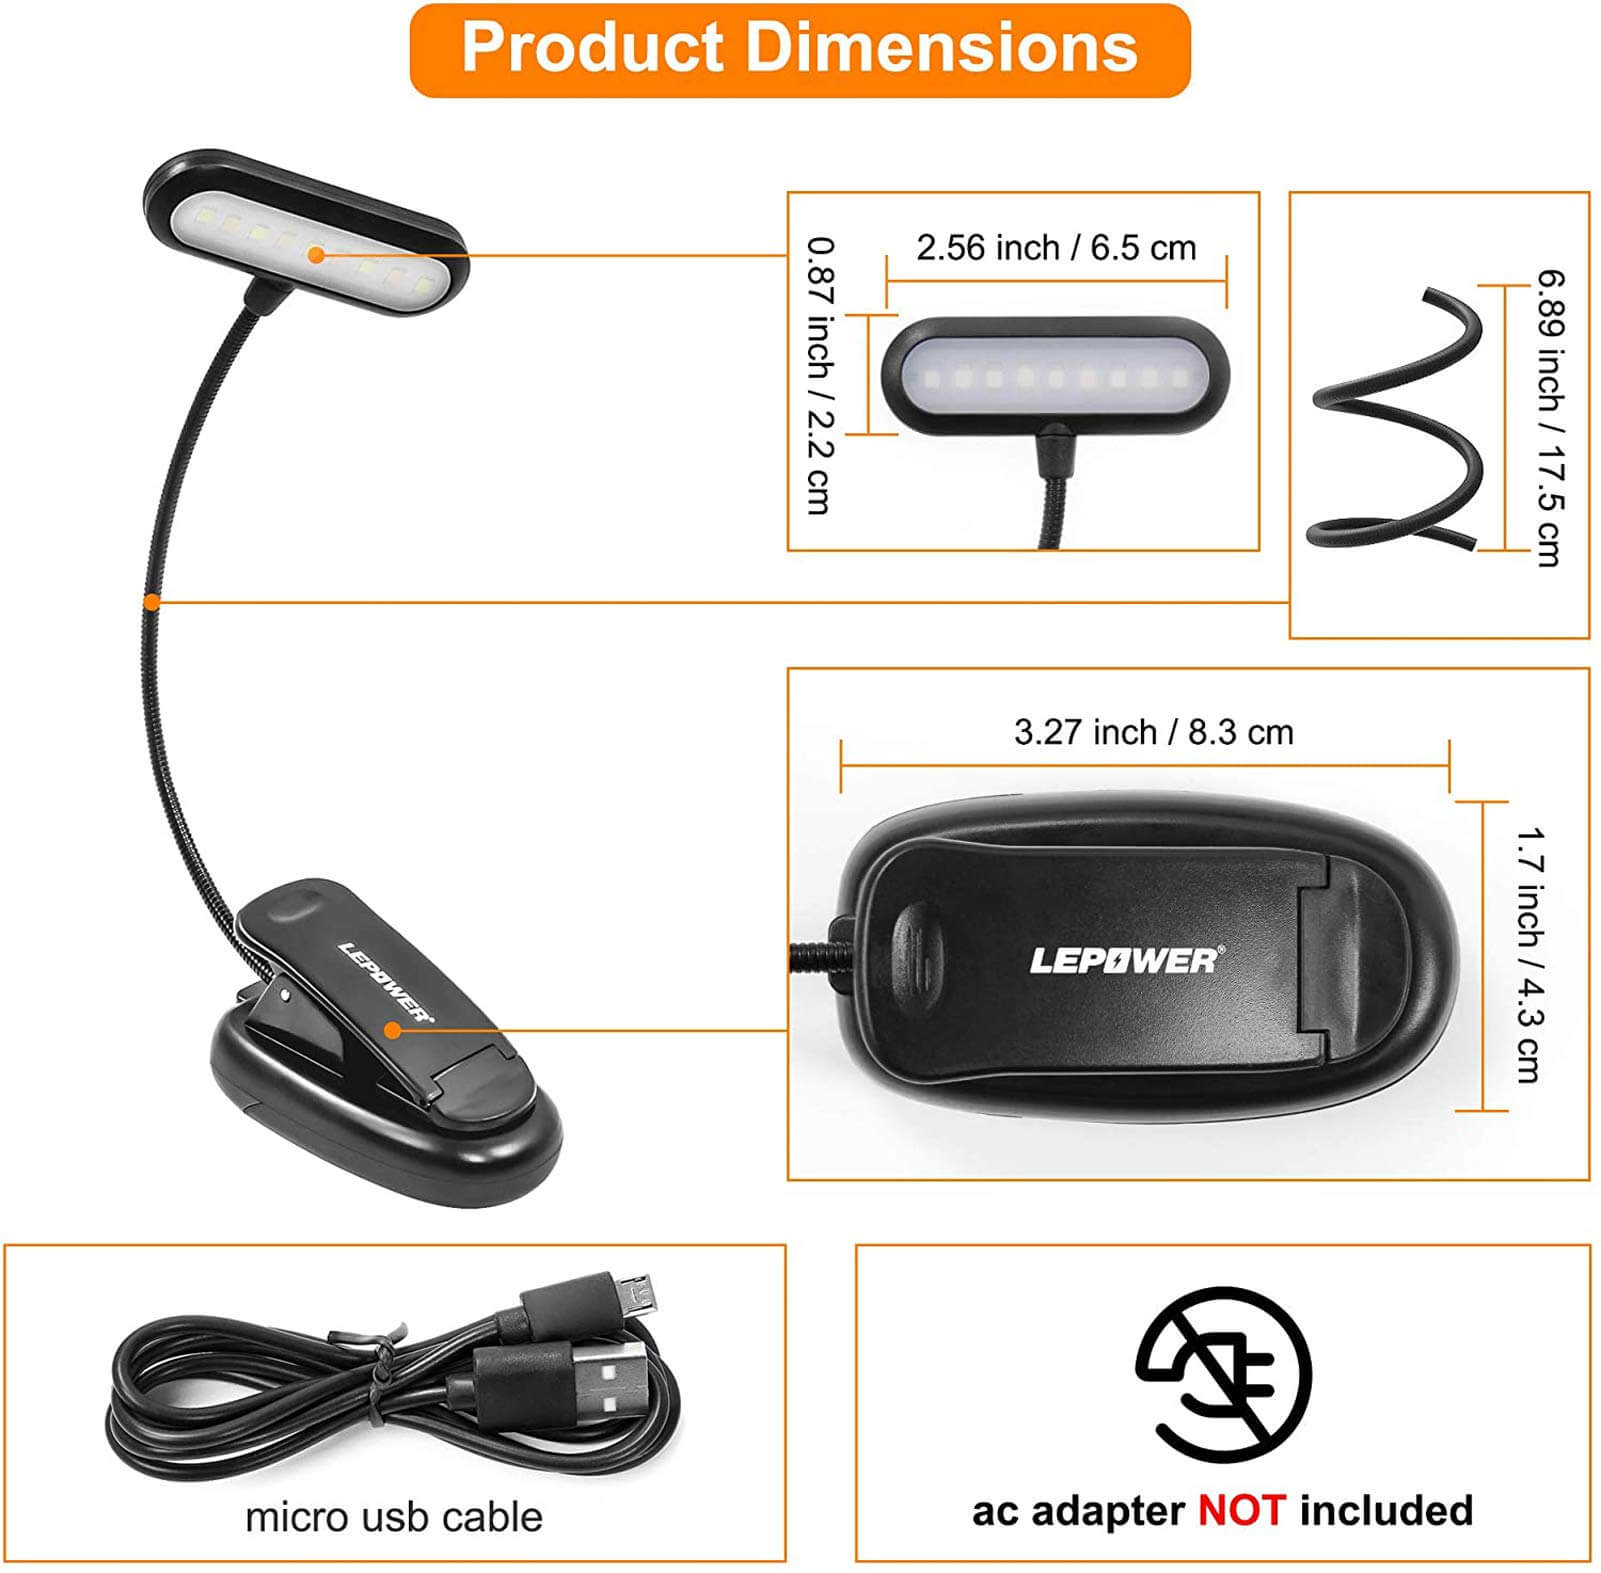 Clip-on Book Light Eye-Caring Dimmable Battery Operated